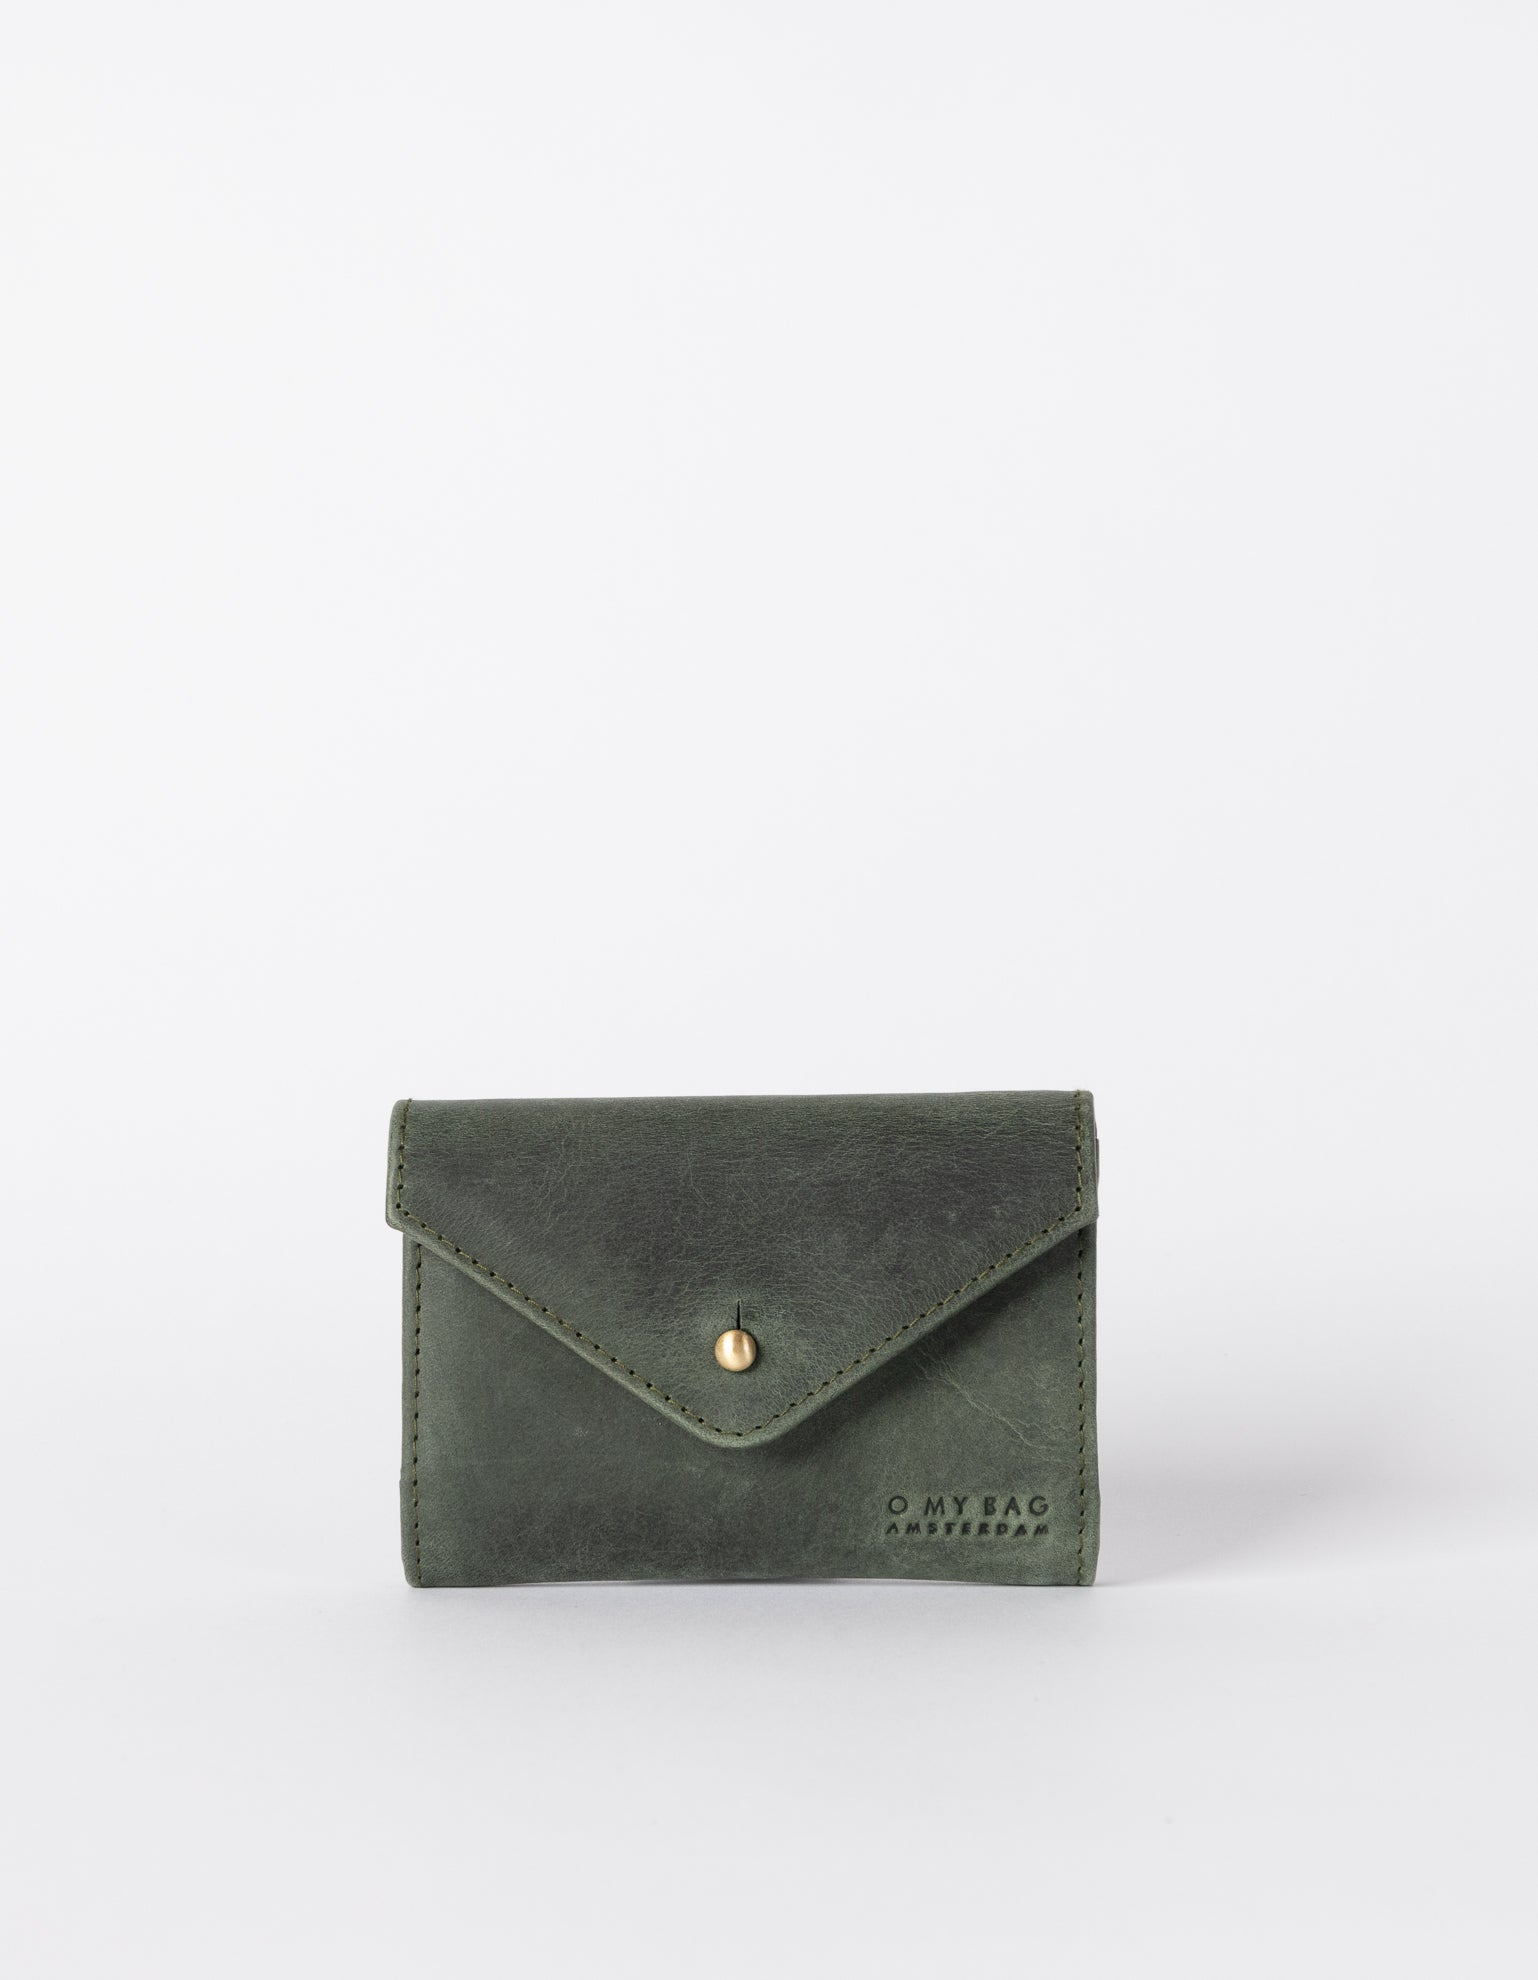 Green Leather wallet. Envelope shape. Front product image.